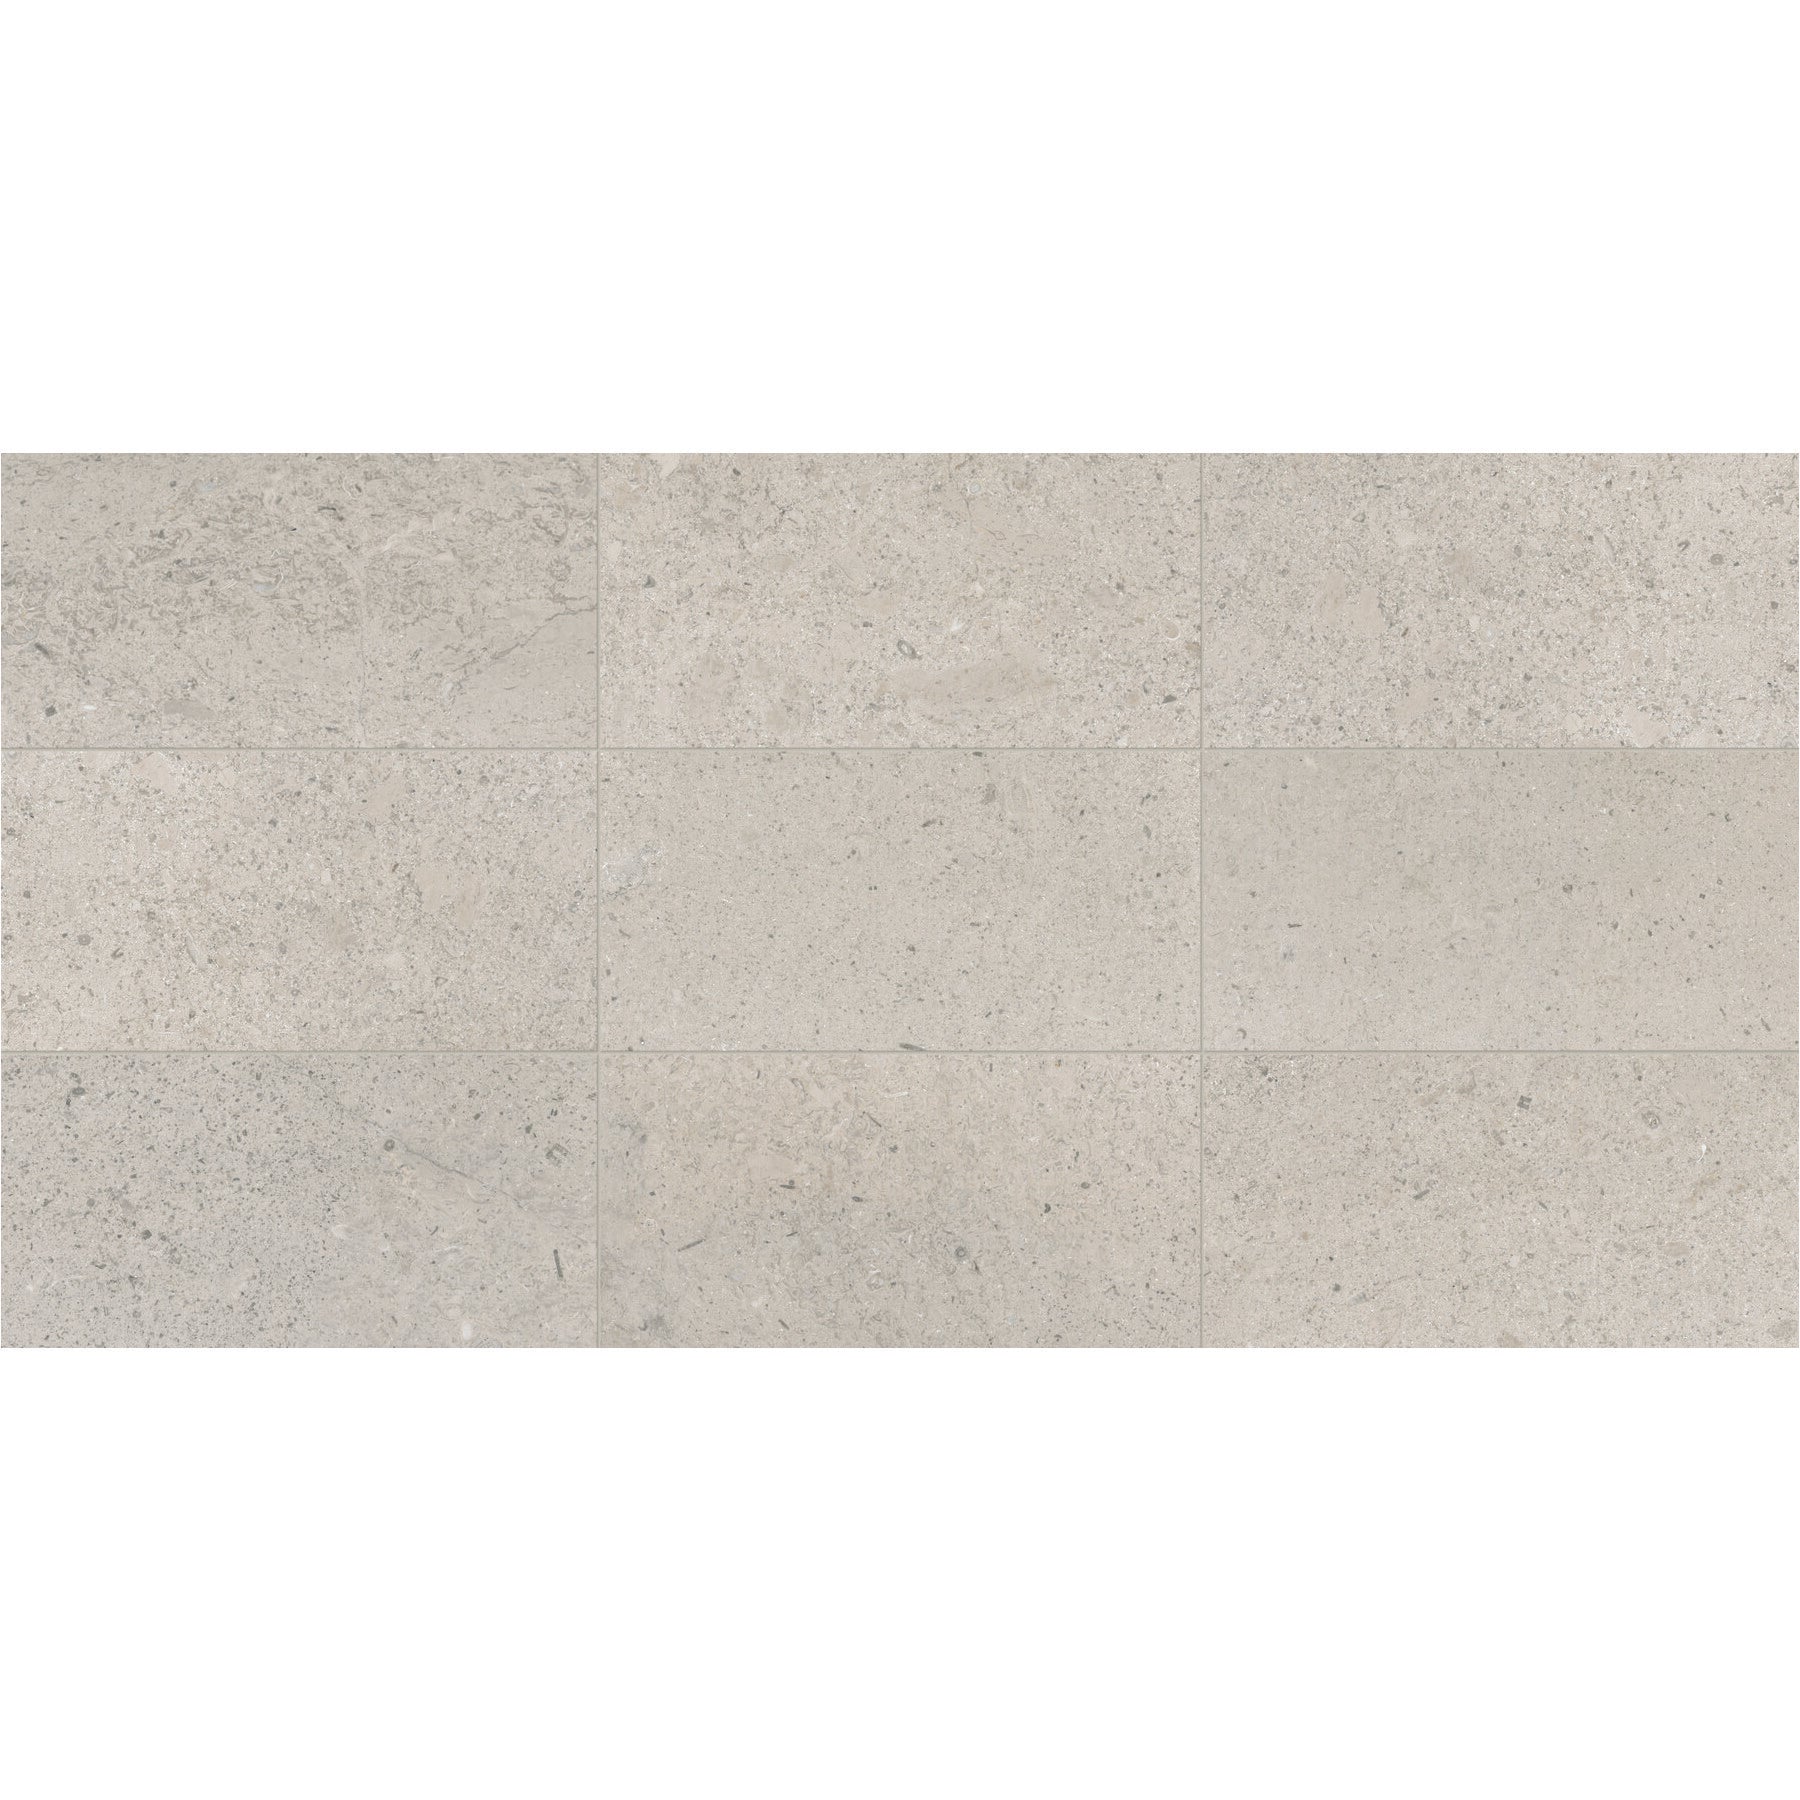 Daltile - Center City - 12 in. x 24 in. Natural Stone - Delancey Grey Polished